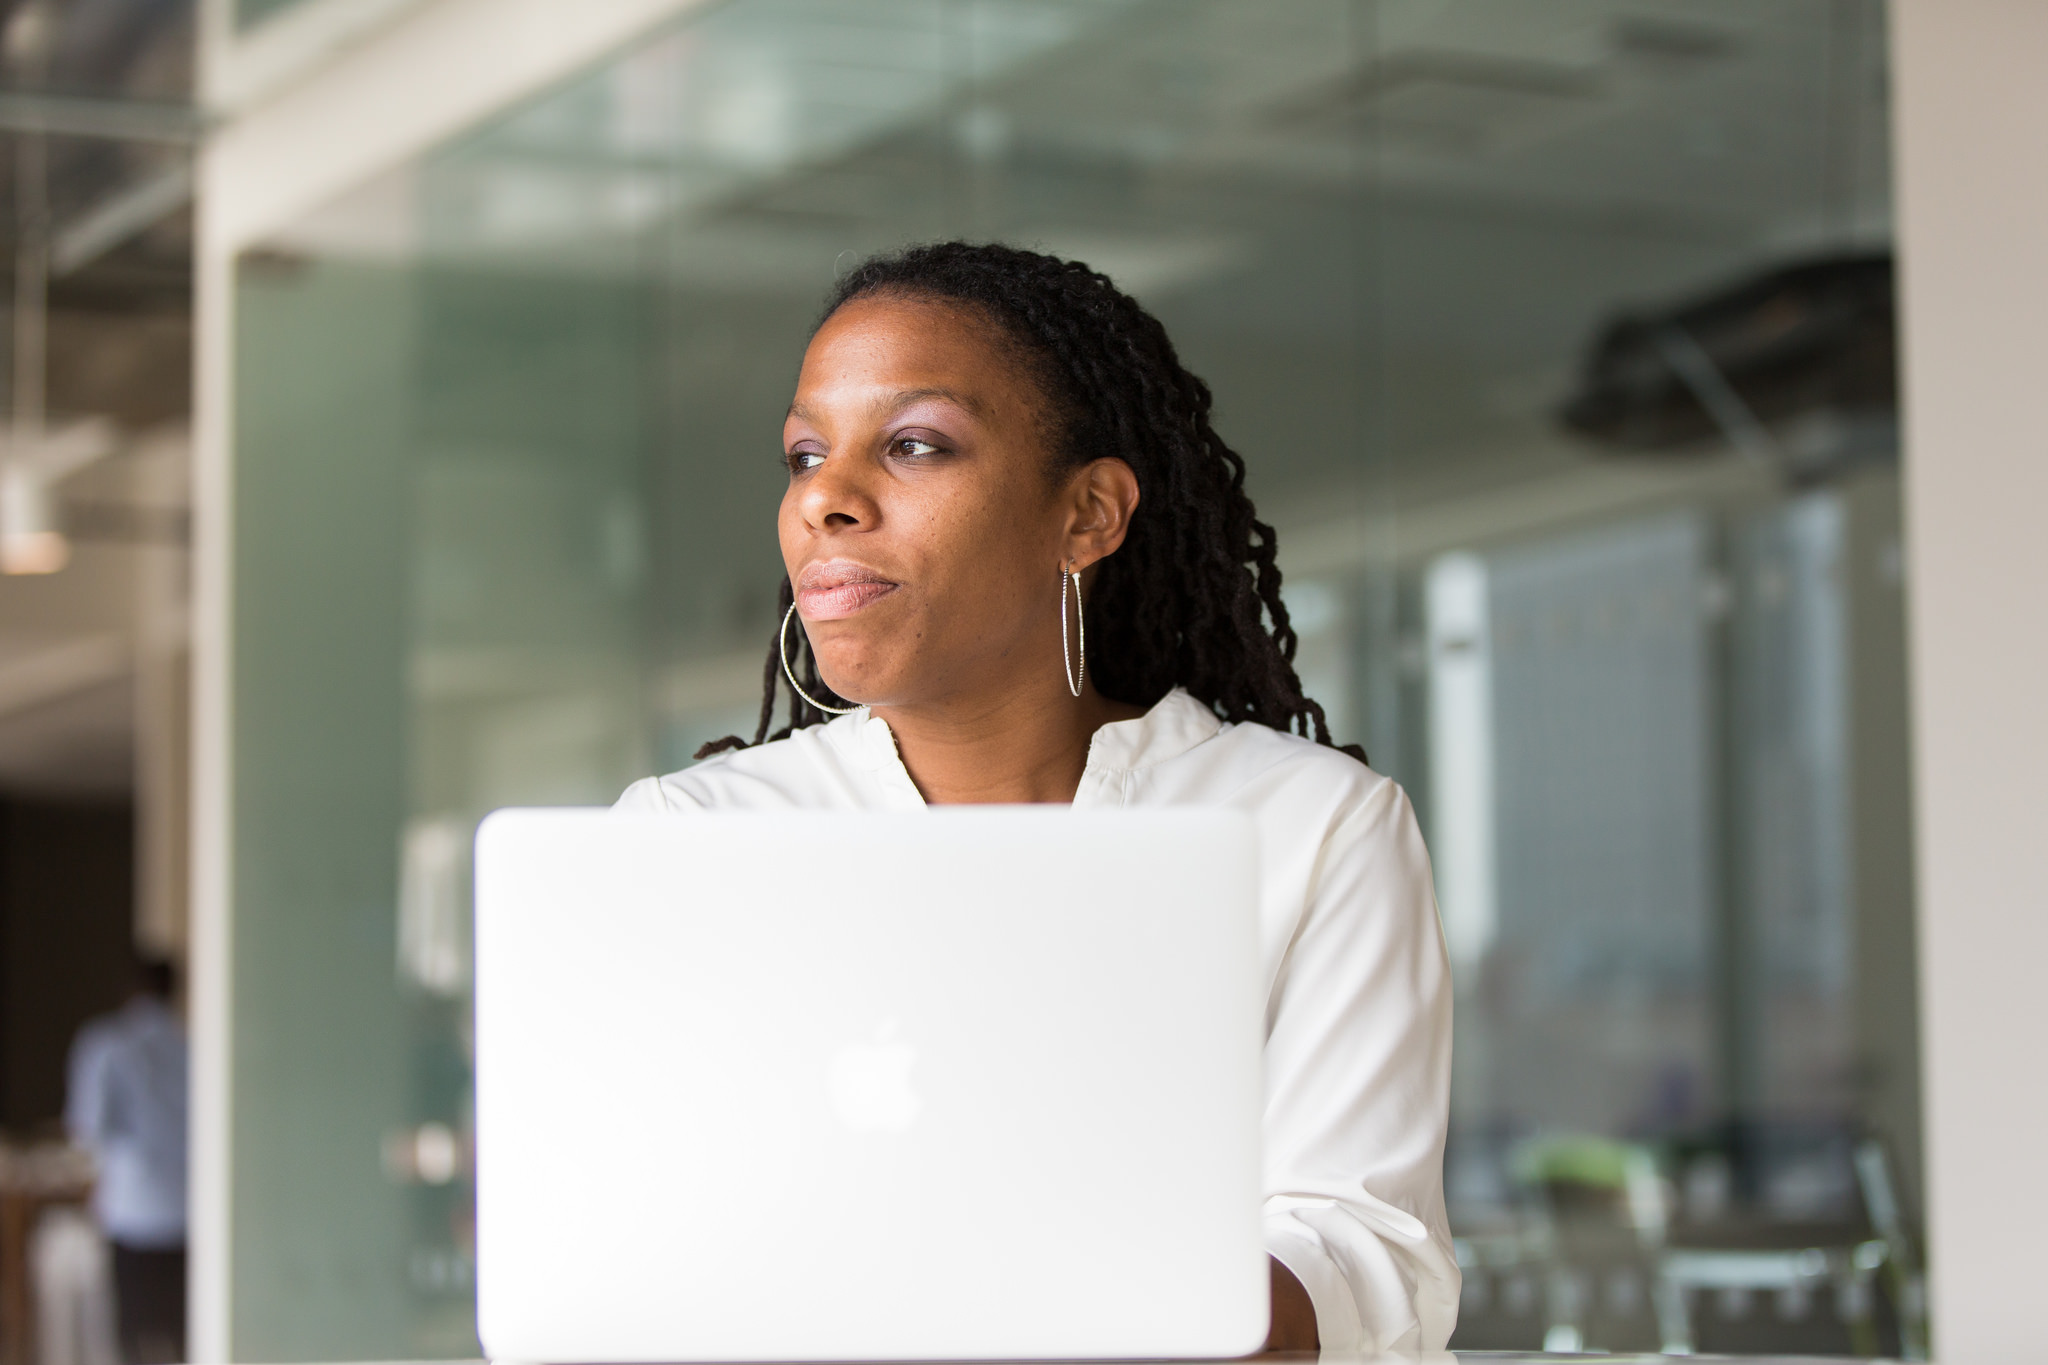 Stock Photo of a Woman of Color Sitting behind a Laptop